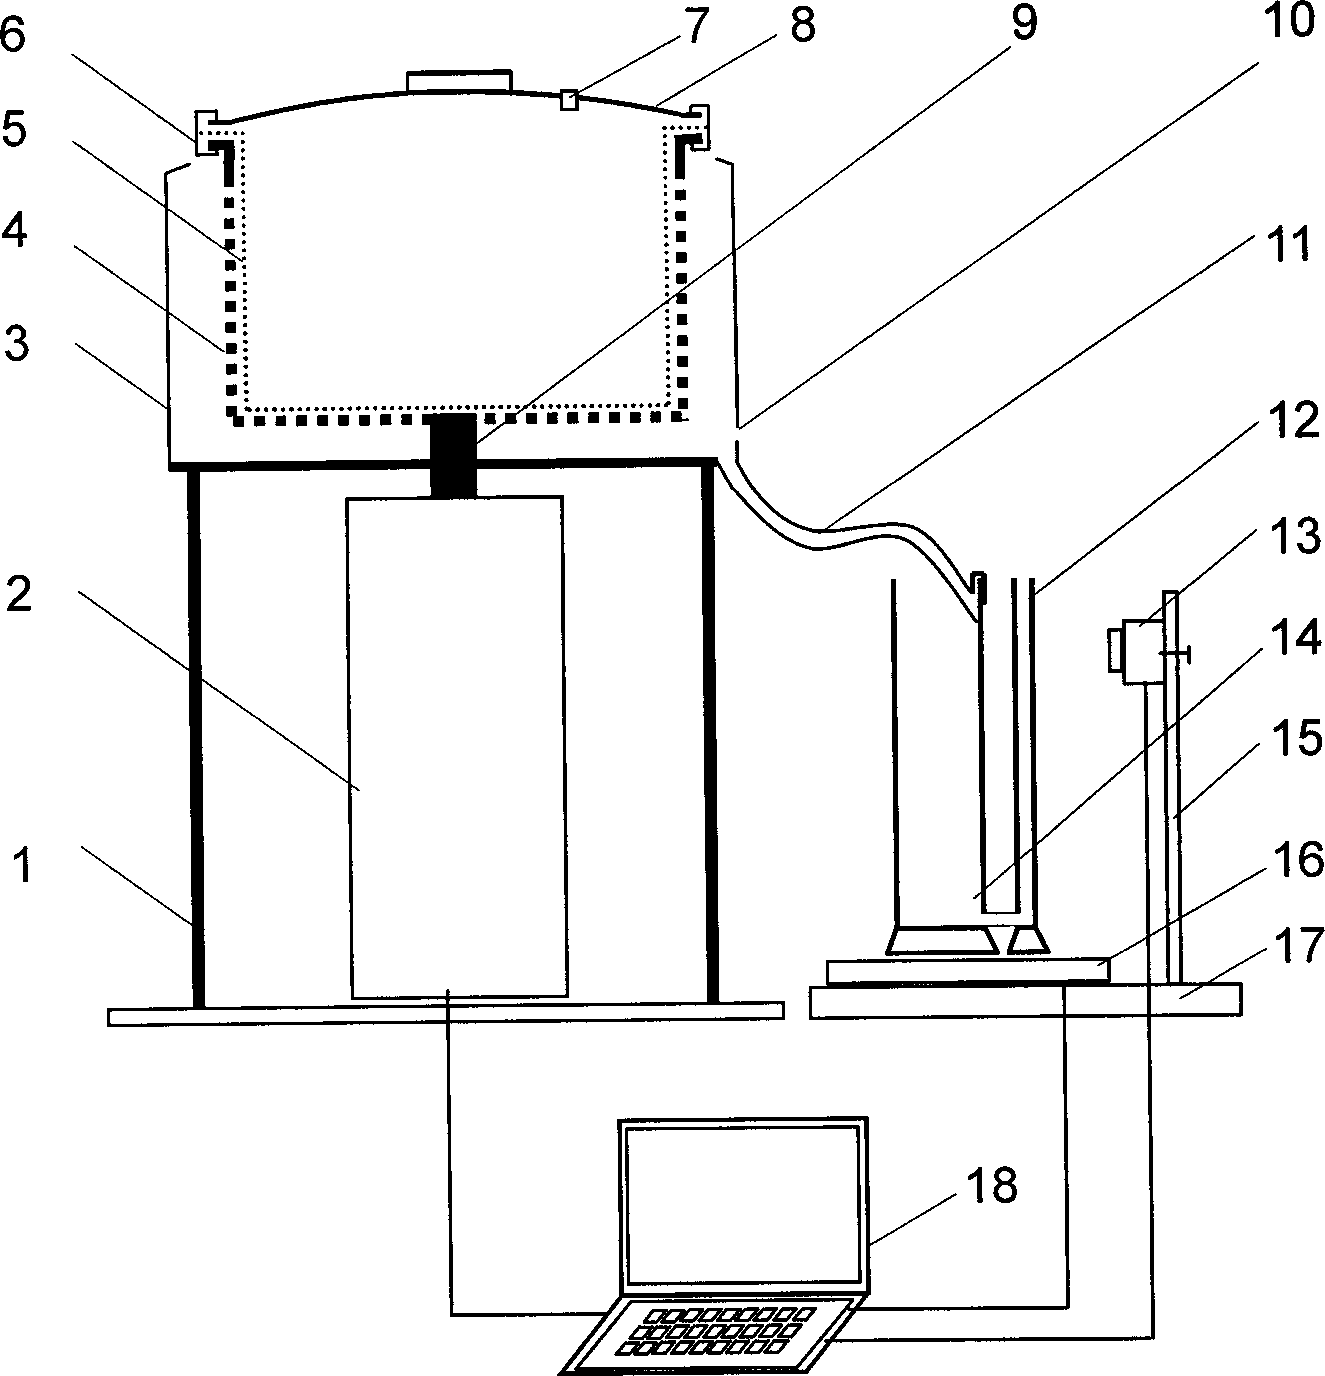 Testing device for measuring sludge dewatering characteristics